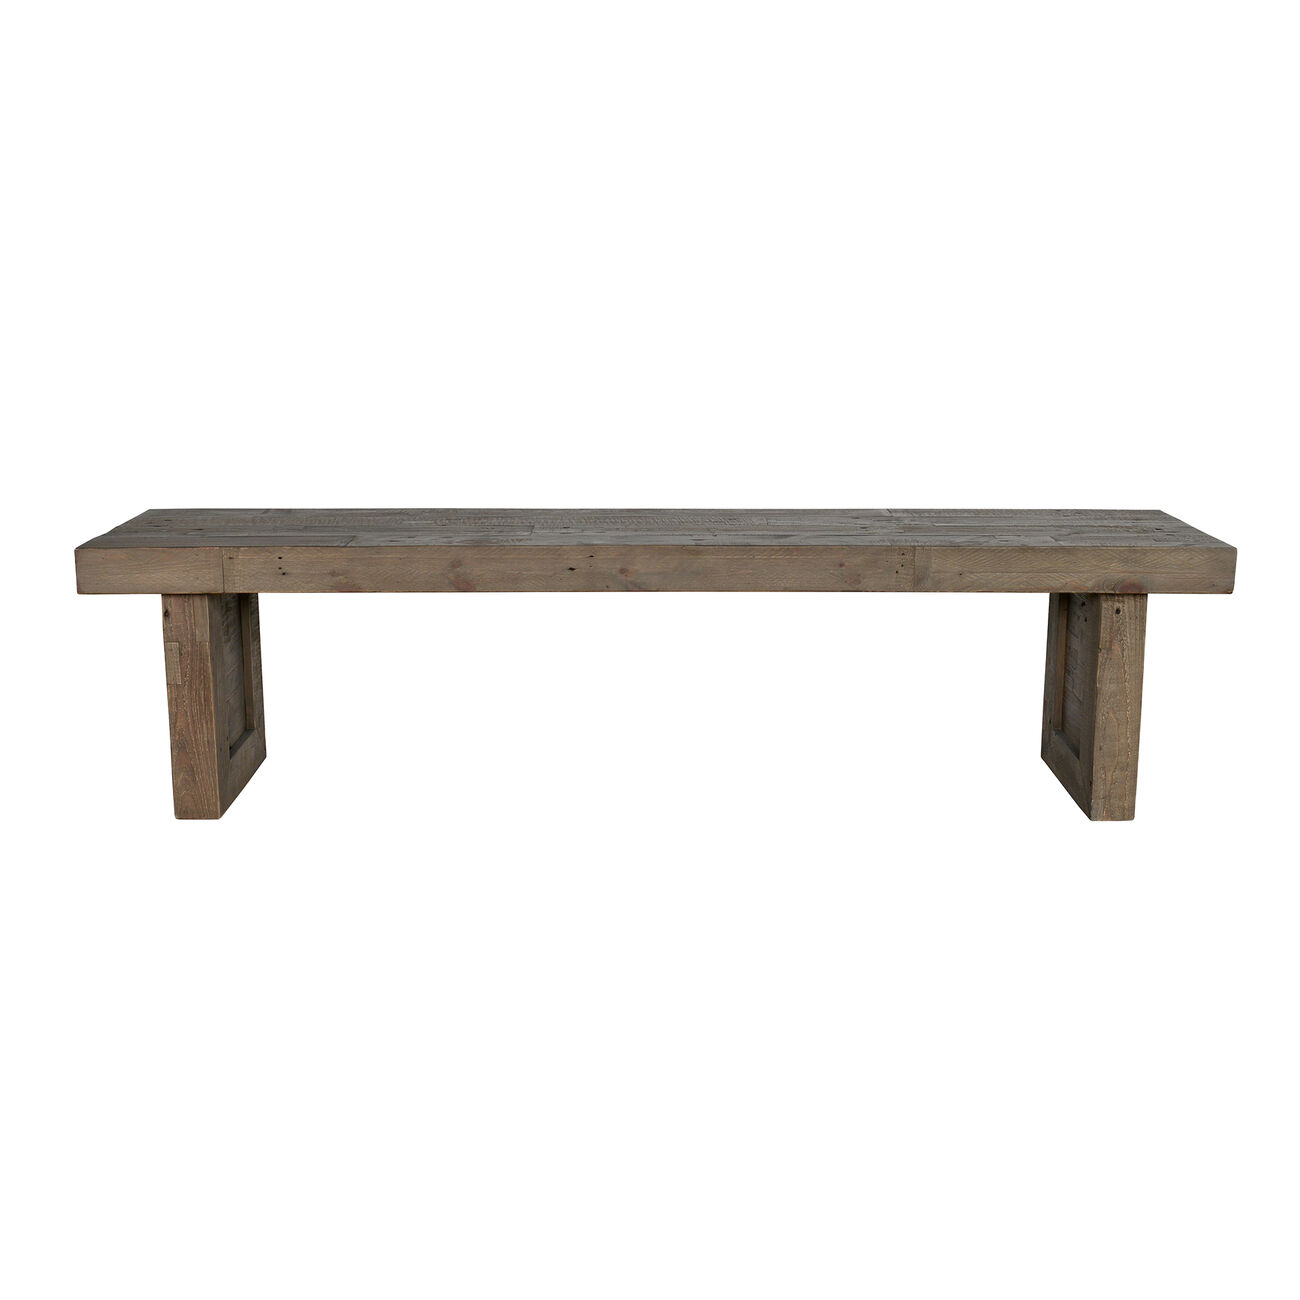 71 Inch Plank Style Wooden Bench, Rustic Brown